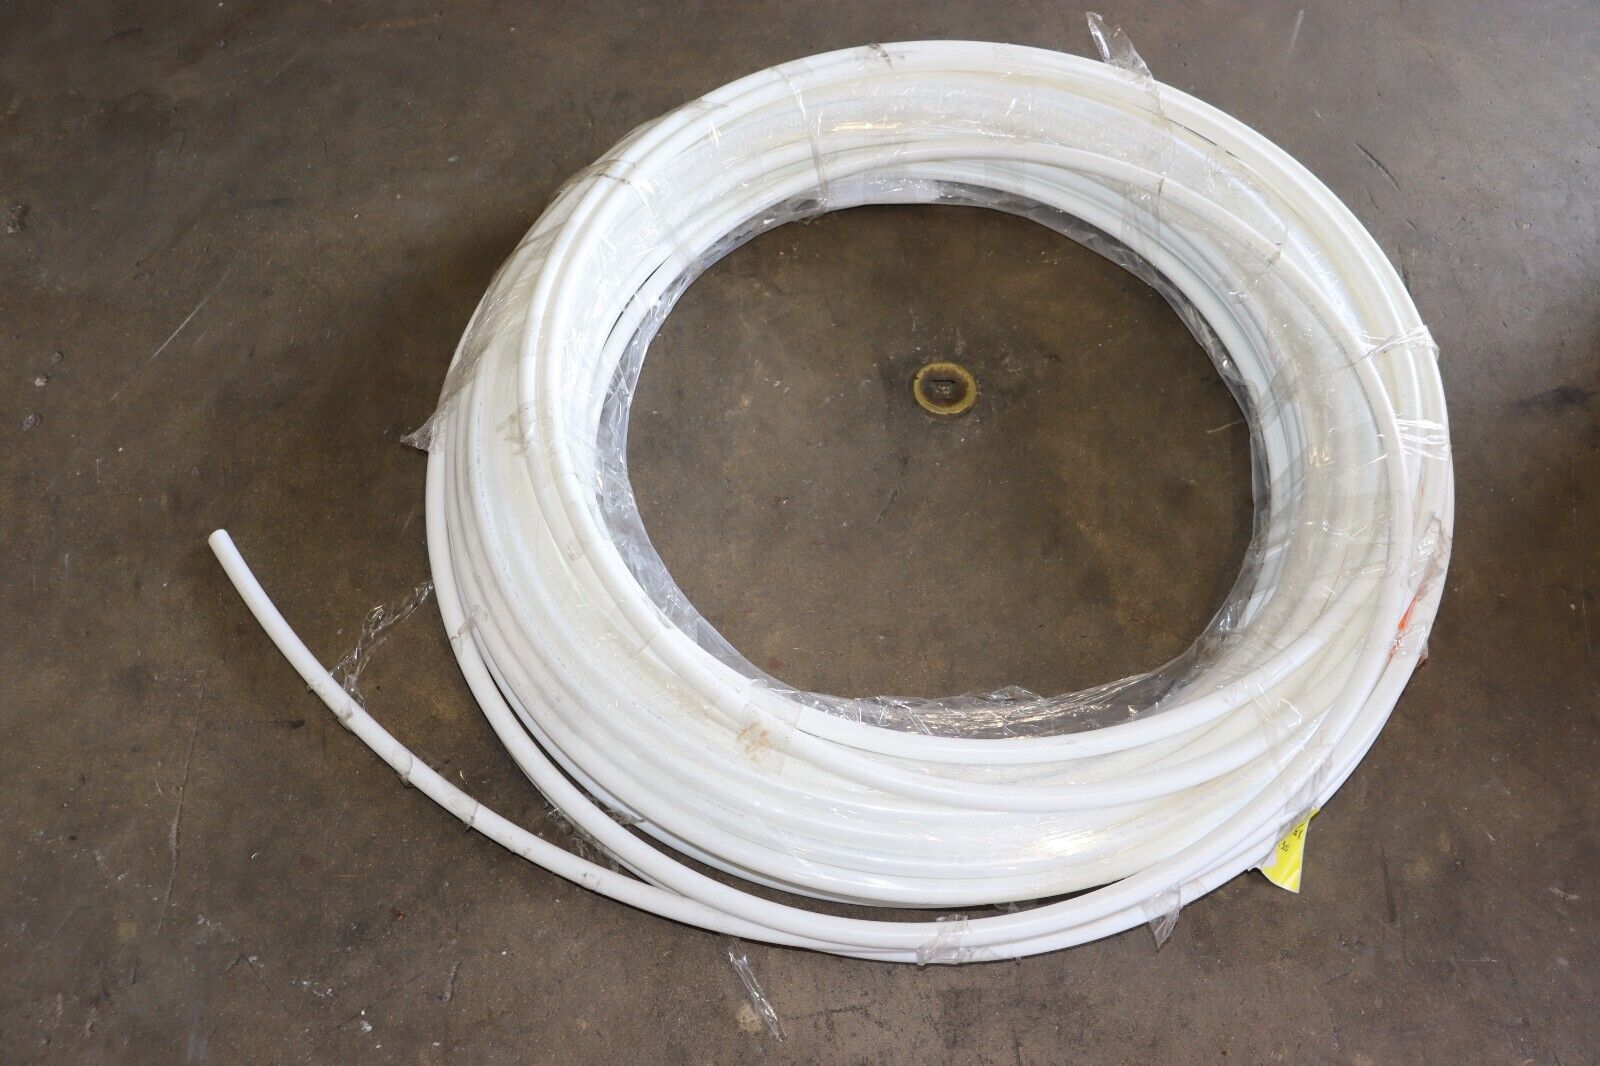 Zurn 3/4 Inch x 300 foot PEX CTS Hot and Cold PEX Tubing Coil White